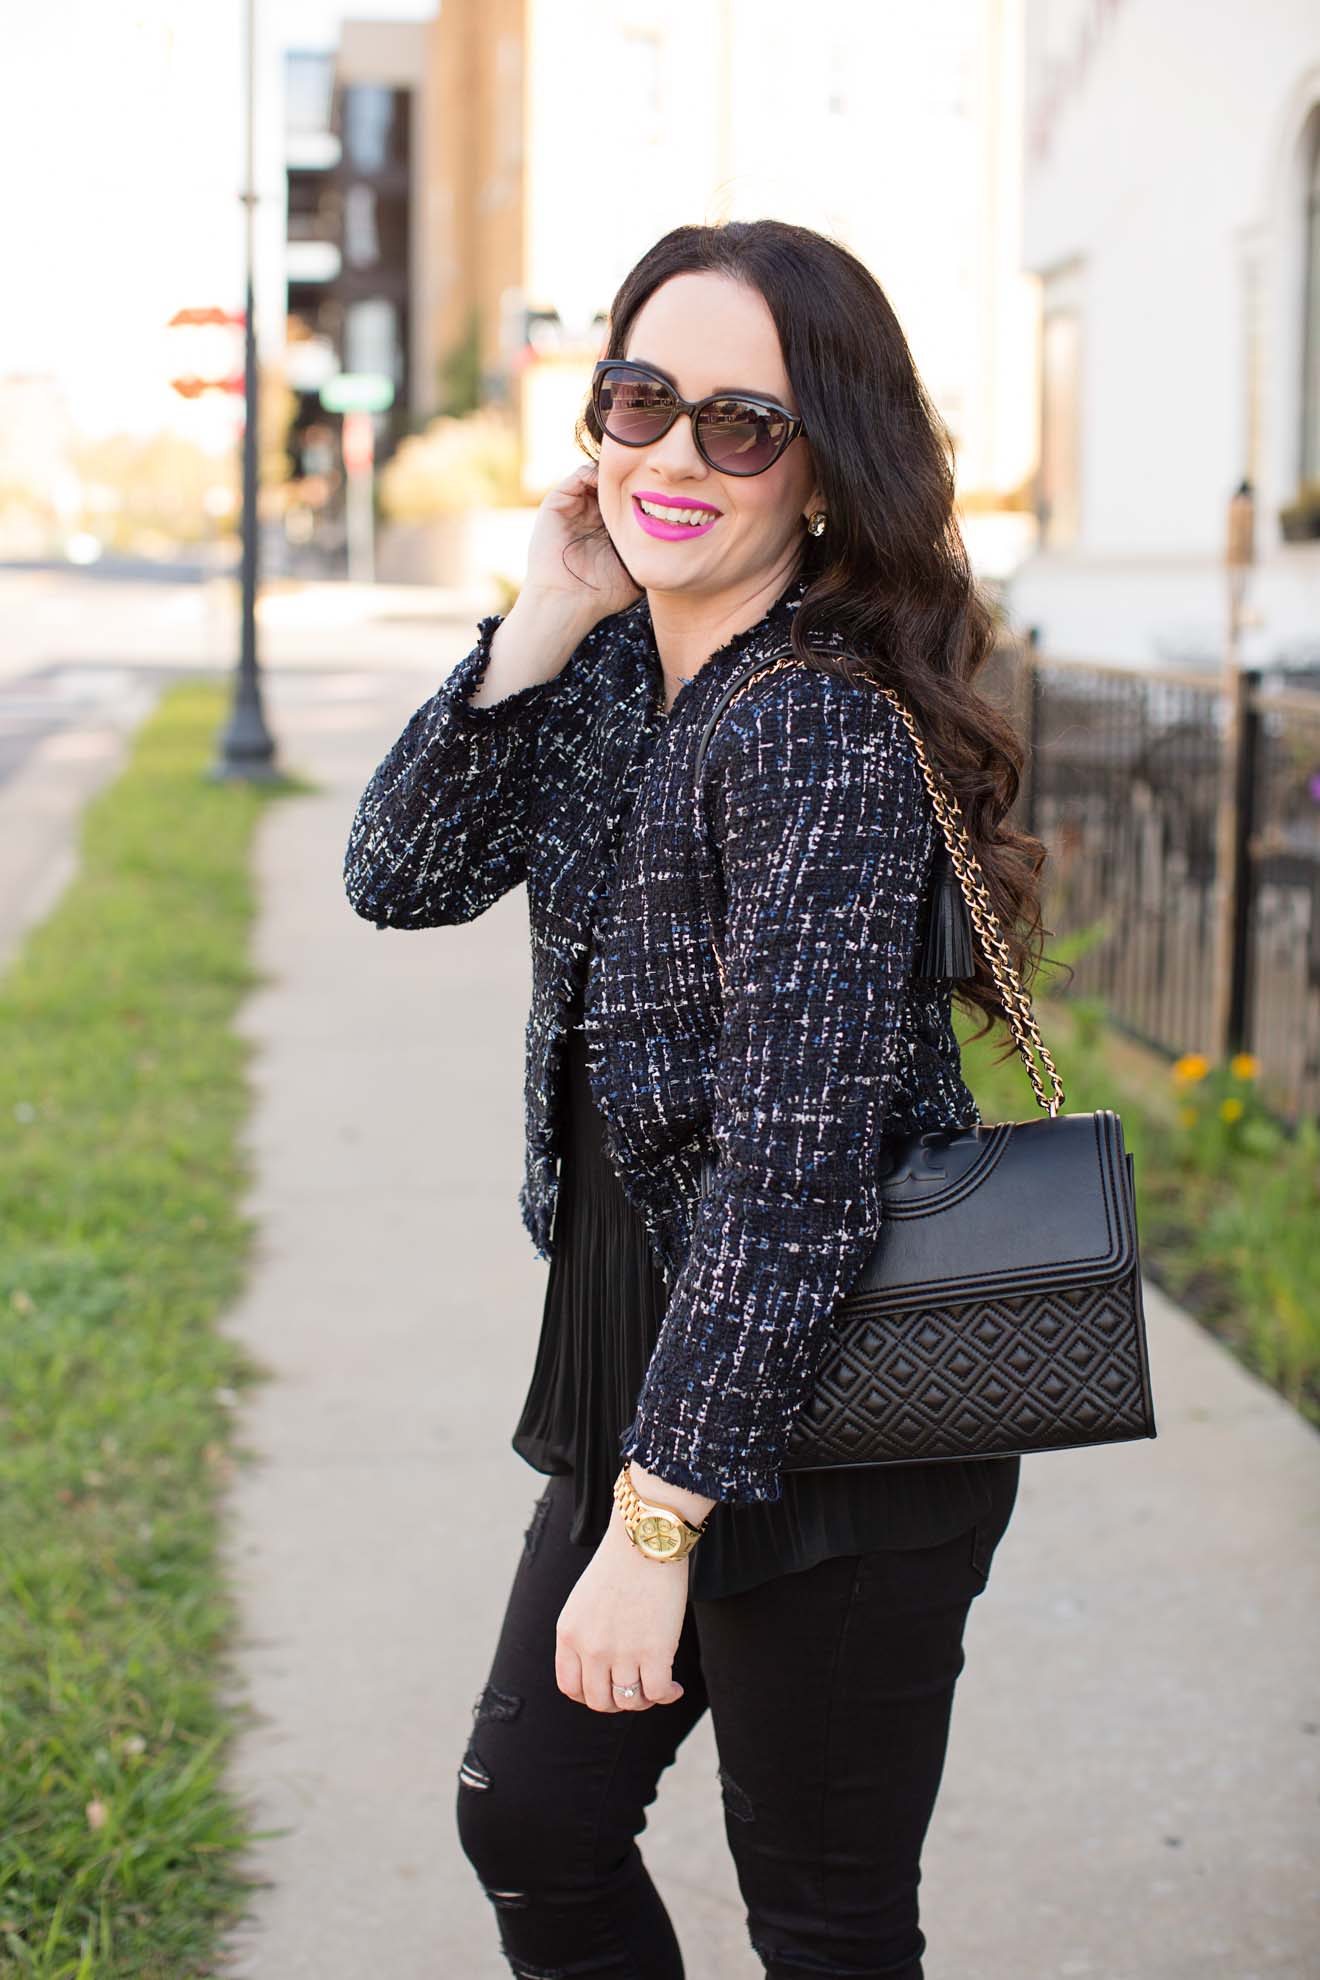 Holiday Outfit Ideas | Tweed Jacket + Black Denim - The Double Take Girls